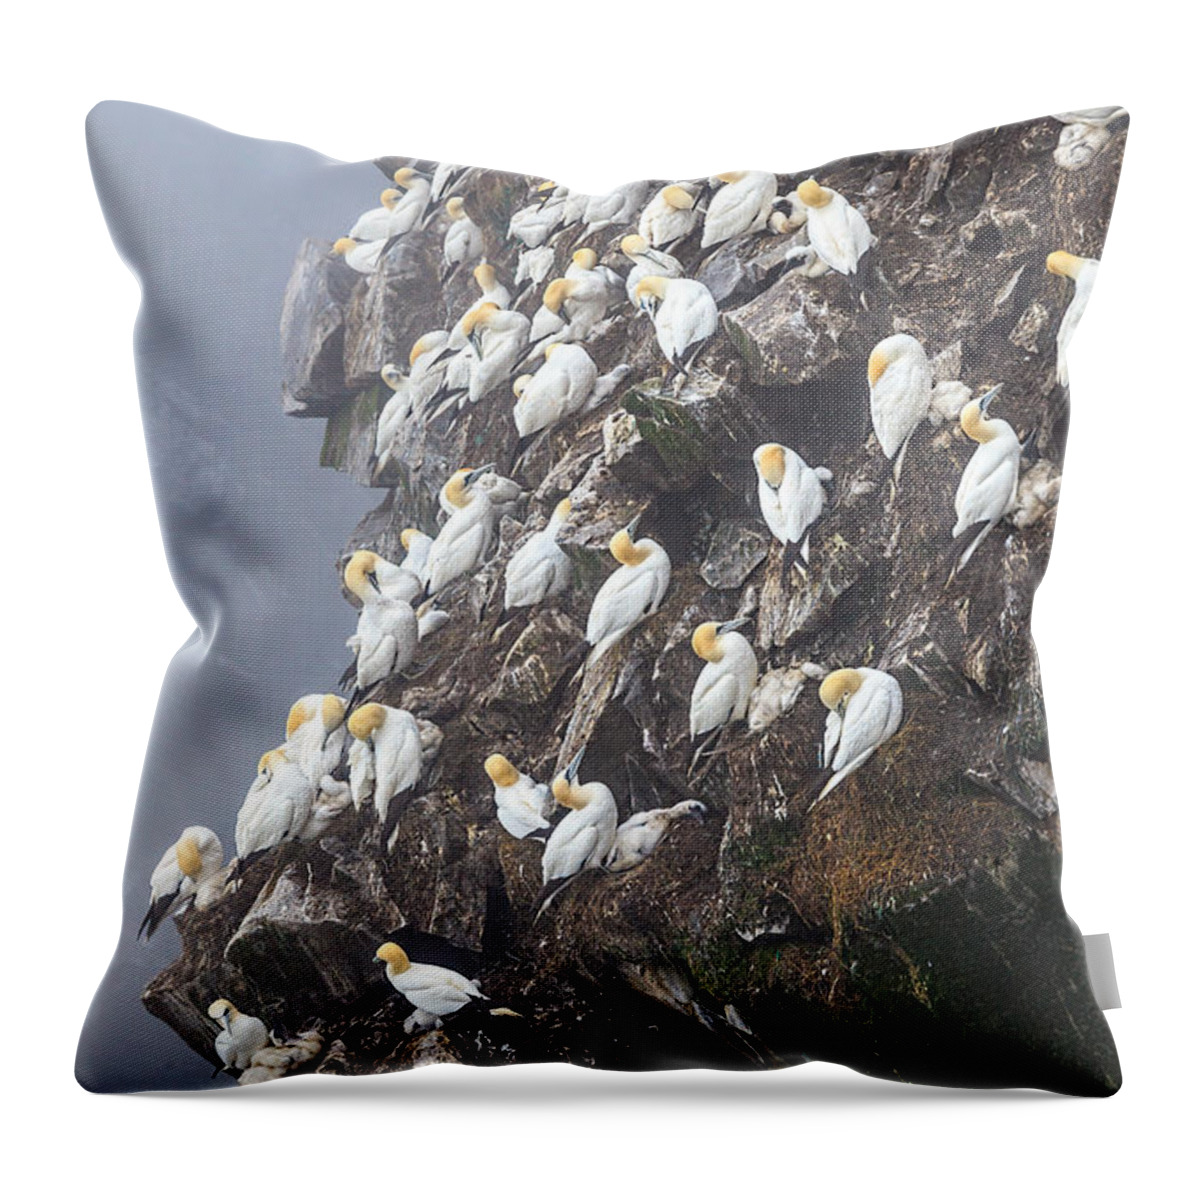 Northern Gannet Throw Pillow featuring the photograph Close-up Norther Gannet Colony by Perla Copernik